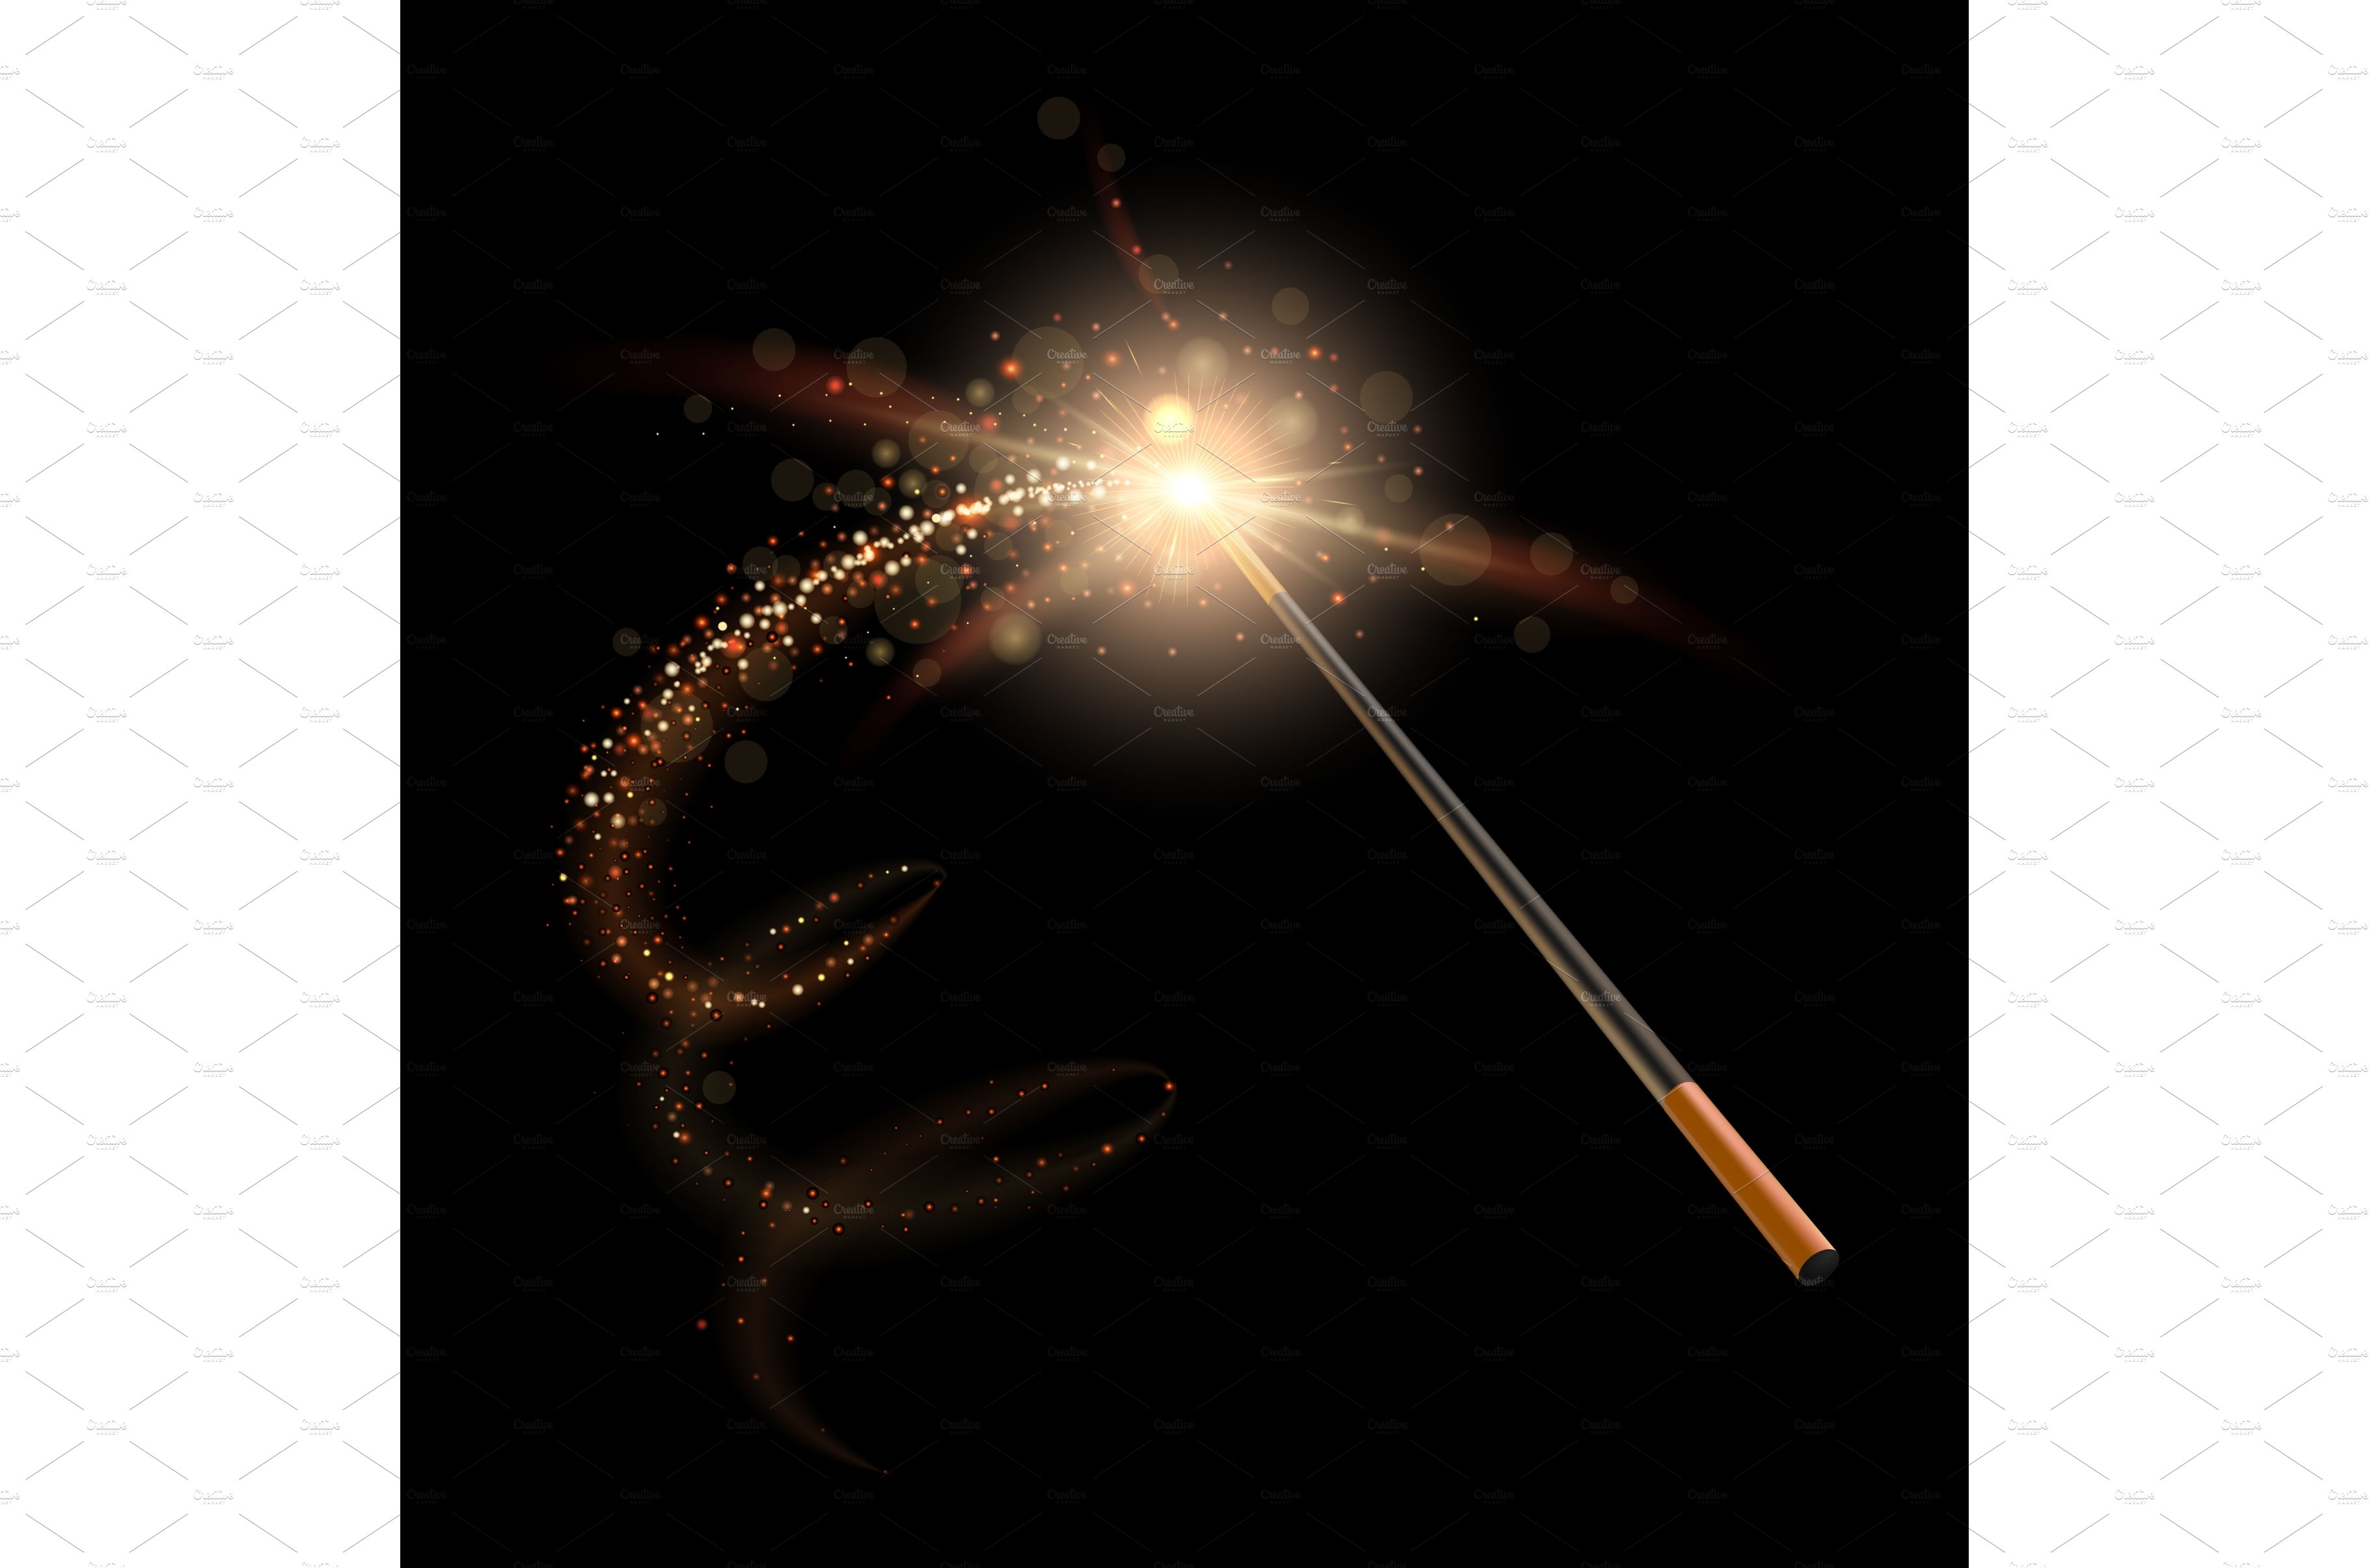 Wizard magic wand. Sparkles wizard cover image.